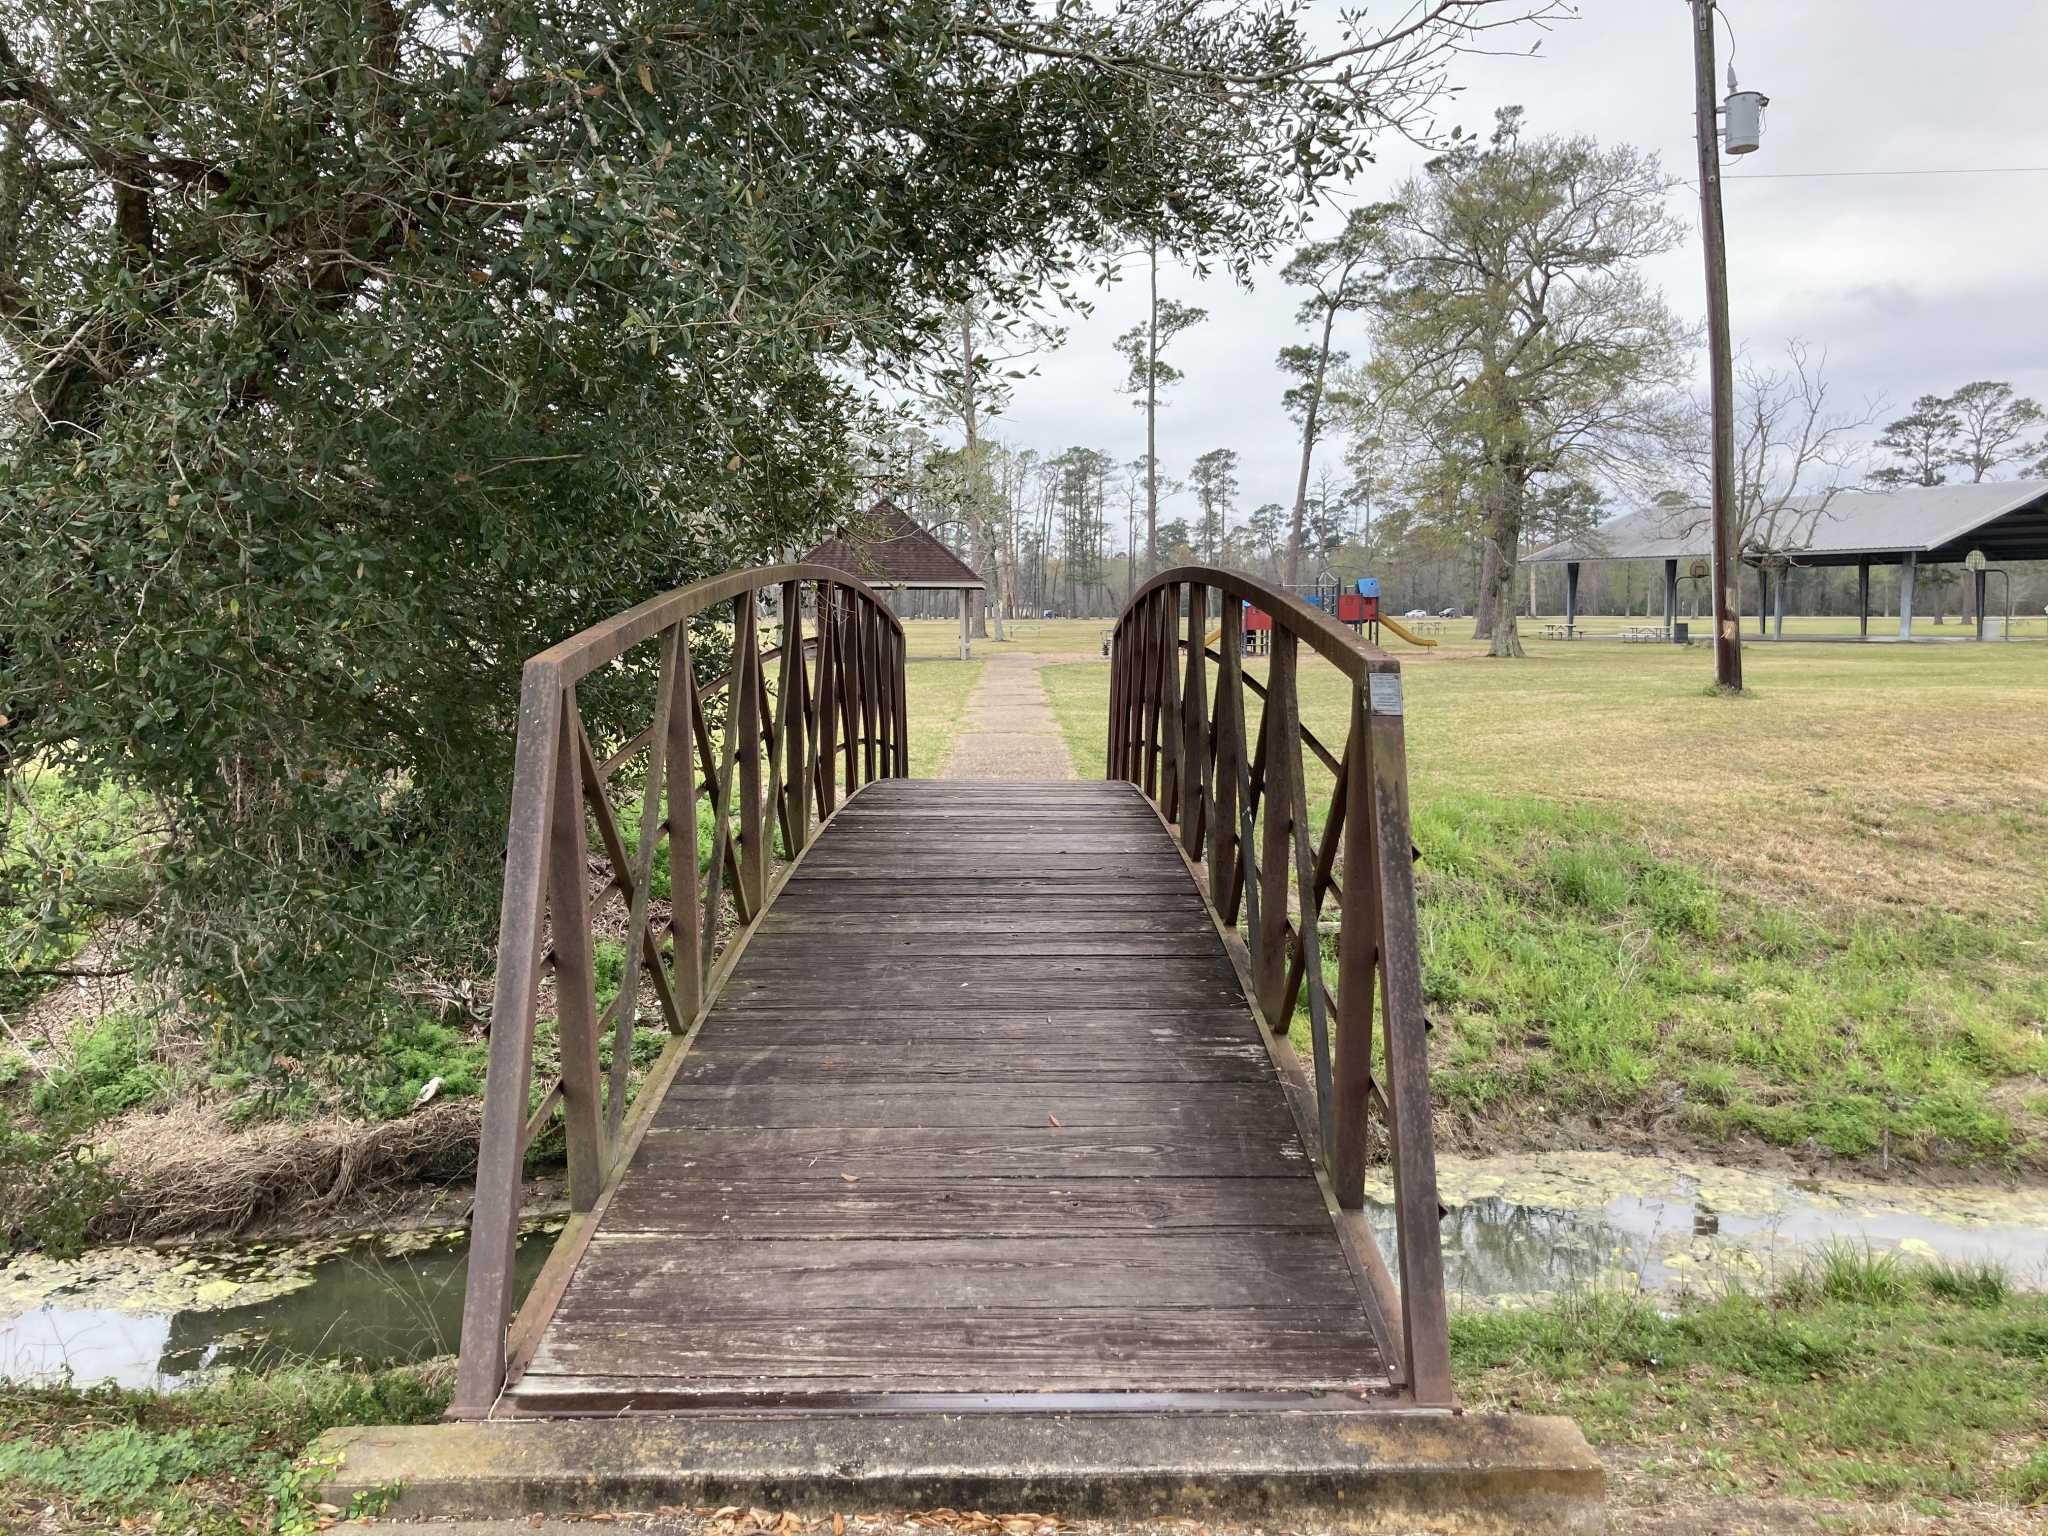 Tyrrell Park could be getting a new walking trail